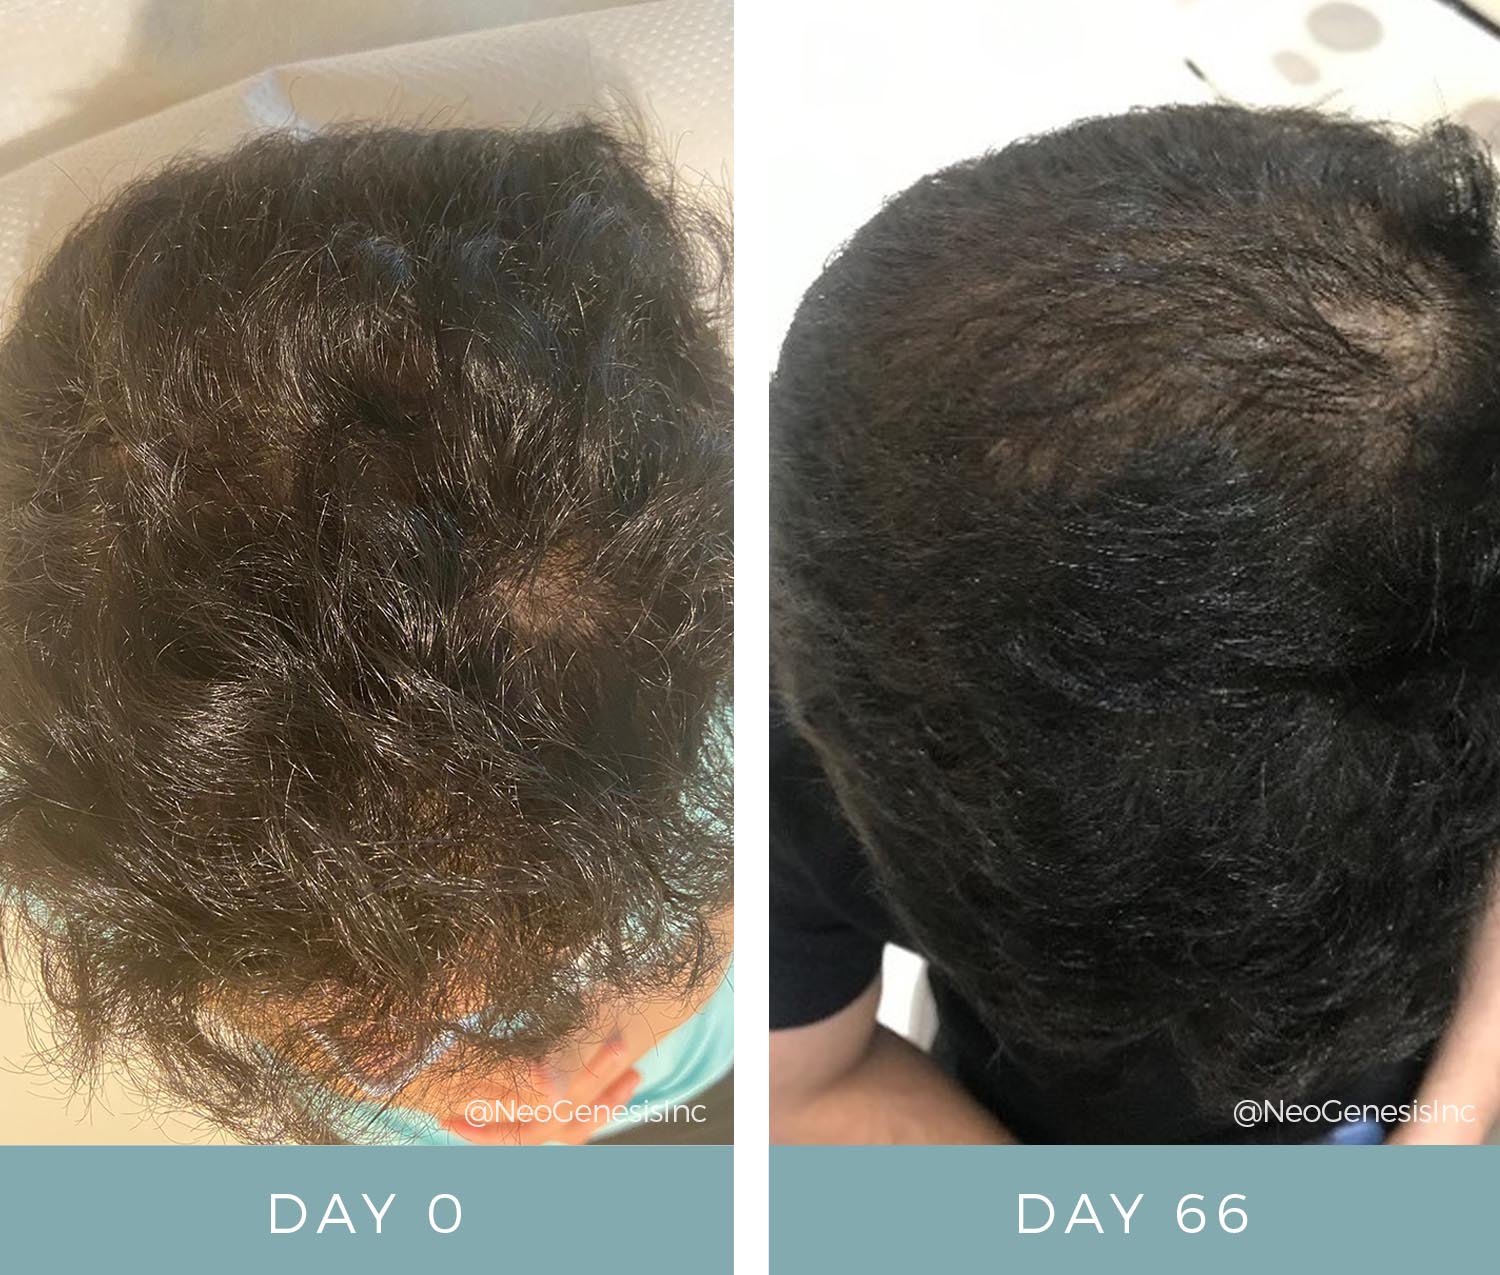 Hair Loss + Microneedling Treatments - Before + After